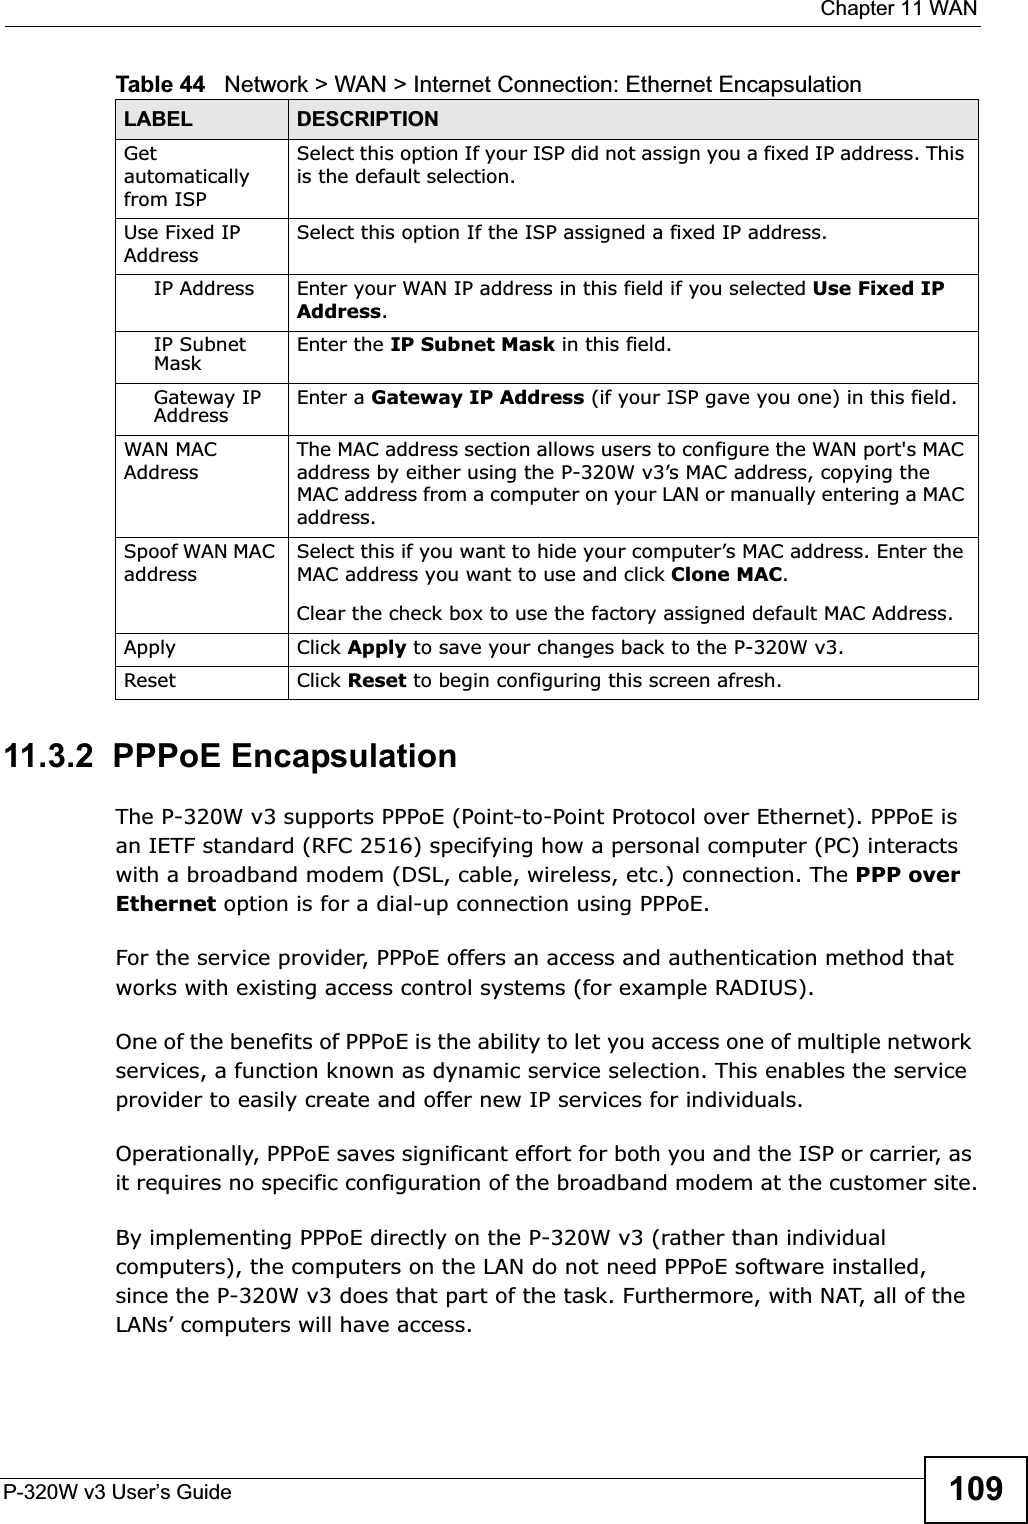  Chapter 11 WANP-320W v3 User’s Guide 10911.3.2  PPPoE EncapsulationThe P-320W v3 supports PPPoE (Point-to-Point Protocol over Ethernet). PPPoE is an IETF standard (RFC 2516) specifying how a personal computer (PC) interacts with a broadband modem (DSL, cable, wireless, etc.) connection. The PPP over Ethernet option is for a dial-up connection using PPPoE.For the service provider, PPPoE offers an access and authentication method that works with existing access control systems (for example RADIUS).One of the benefits of PPPoE is the ability to let you access one of multiple network services, a function known as dynamic service selection. This enables the service provider to easily create and offer new IP services for individuals.Operationally, PPPoE saves significant effort for both you and the ISP or carrier, as it requires no specific configuration of the broadband modem at the customer site.By implementing PPPoE directly on the P-320W v3 (rather than individual computers), the computers on the LAN do not need PPPoE software installed, since the P-320W v3 does that part of the task. Furthermore, with NAT, all of the LANs’ computers will have access.Getautomatically from ISP Select this option If your ISP did not assign you a fixed IP address. This is the default selection. Use Fixed IP AddressSelect this option If the ISP assigned a fixed IP address. IP Address Enter your WAN IP address in this field if you selected Use Fixed IP Address.IP Subnet Mask Enter the IP Subnet Mask in this field.Gateway IP Address Enter a Gateway IP Address (if your ISP gave you one) in this field.WAN MAC AddressThe MAC address section allows users to configure the WAN port&apos;s MAC address by either using the P-320W v3’s MAC address, copying the MAC address from a computer on your LAN or manually entering a MAC address. Spoof WAN MAC addressSelect this if you want to hide your computer’s MAC address. Enter the MAC address you want to use and click Clone MAC.Clear the check box to use the factory assigned default MAC Address.Apply Click Apply to save your changes back to the P-320W v3.Reset Click Reset to begin configuring this screen afresh.Table 44   Network &gt; WAN &gt; Internet Connection: Ethernet EncapsulationLABEL DESCRIPTION